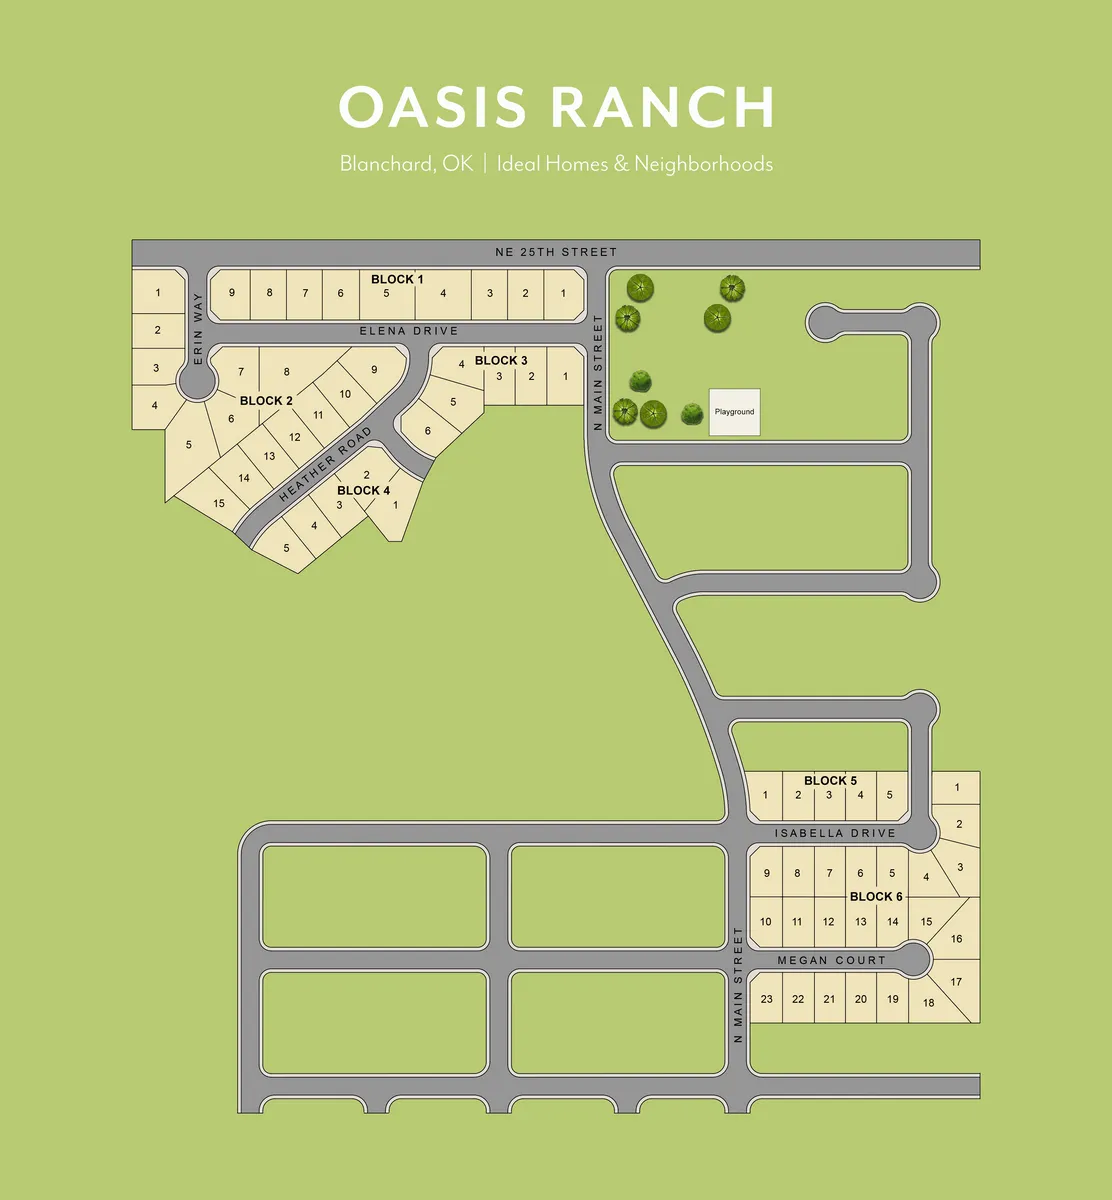 Oasis Ranch